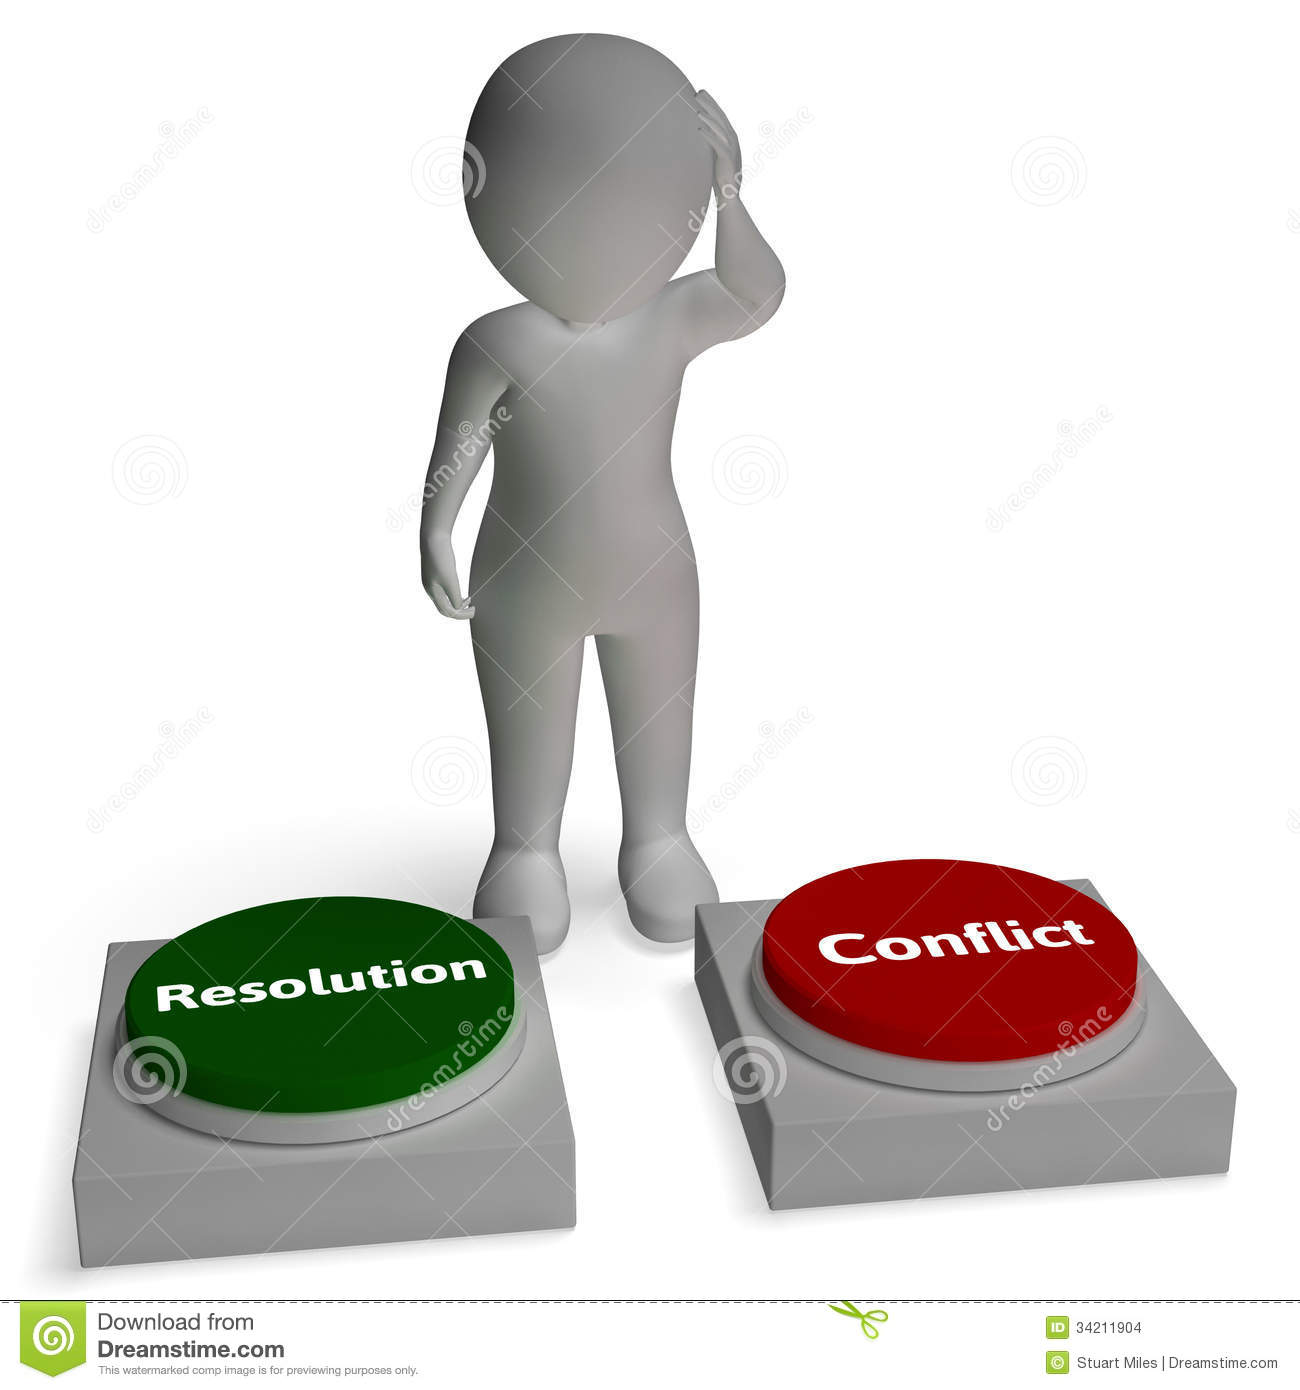 Conflict Resolution Buttons Show War Or Reconciliation Stock Images